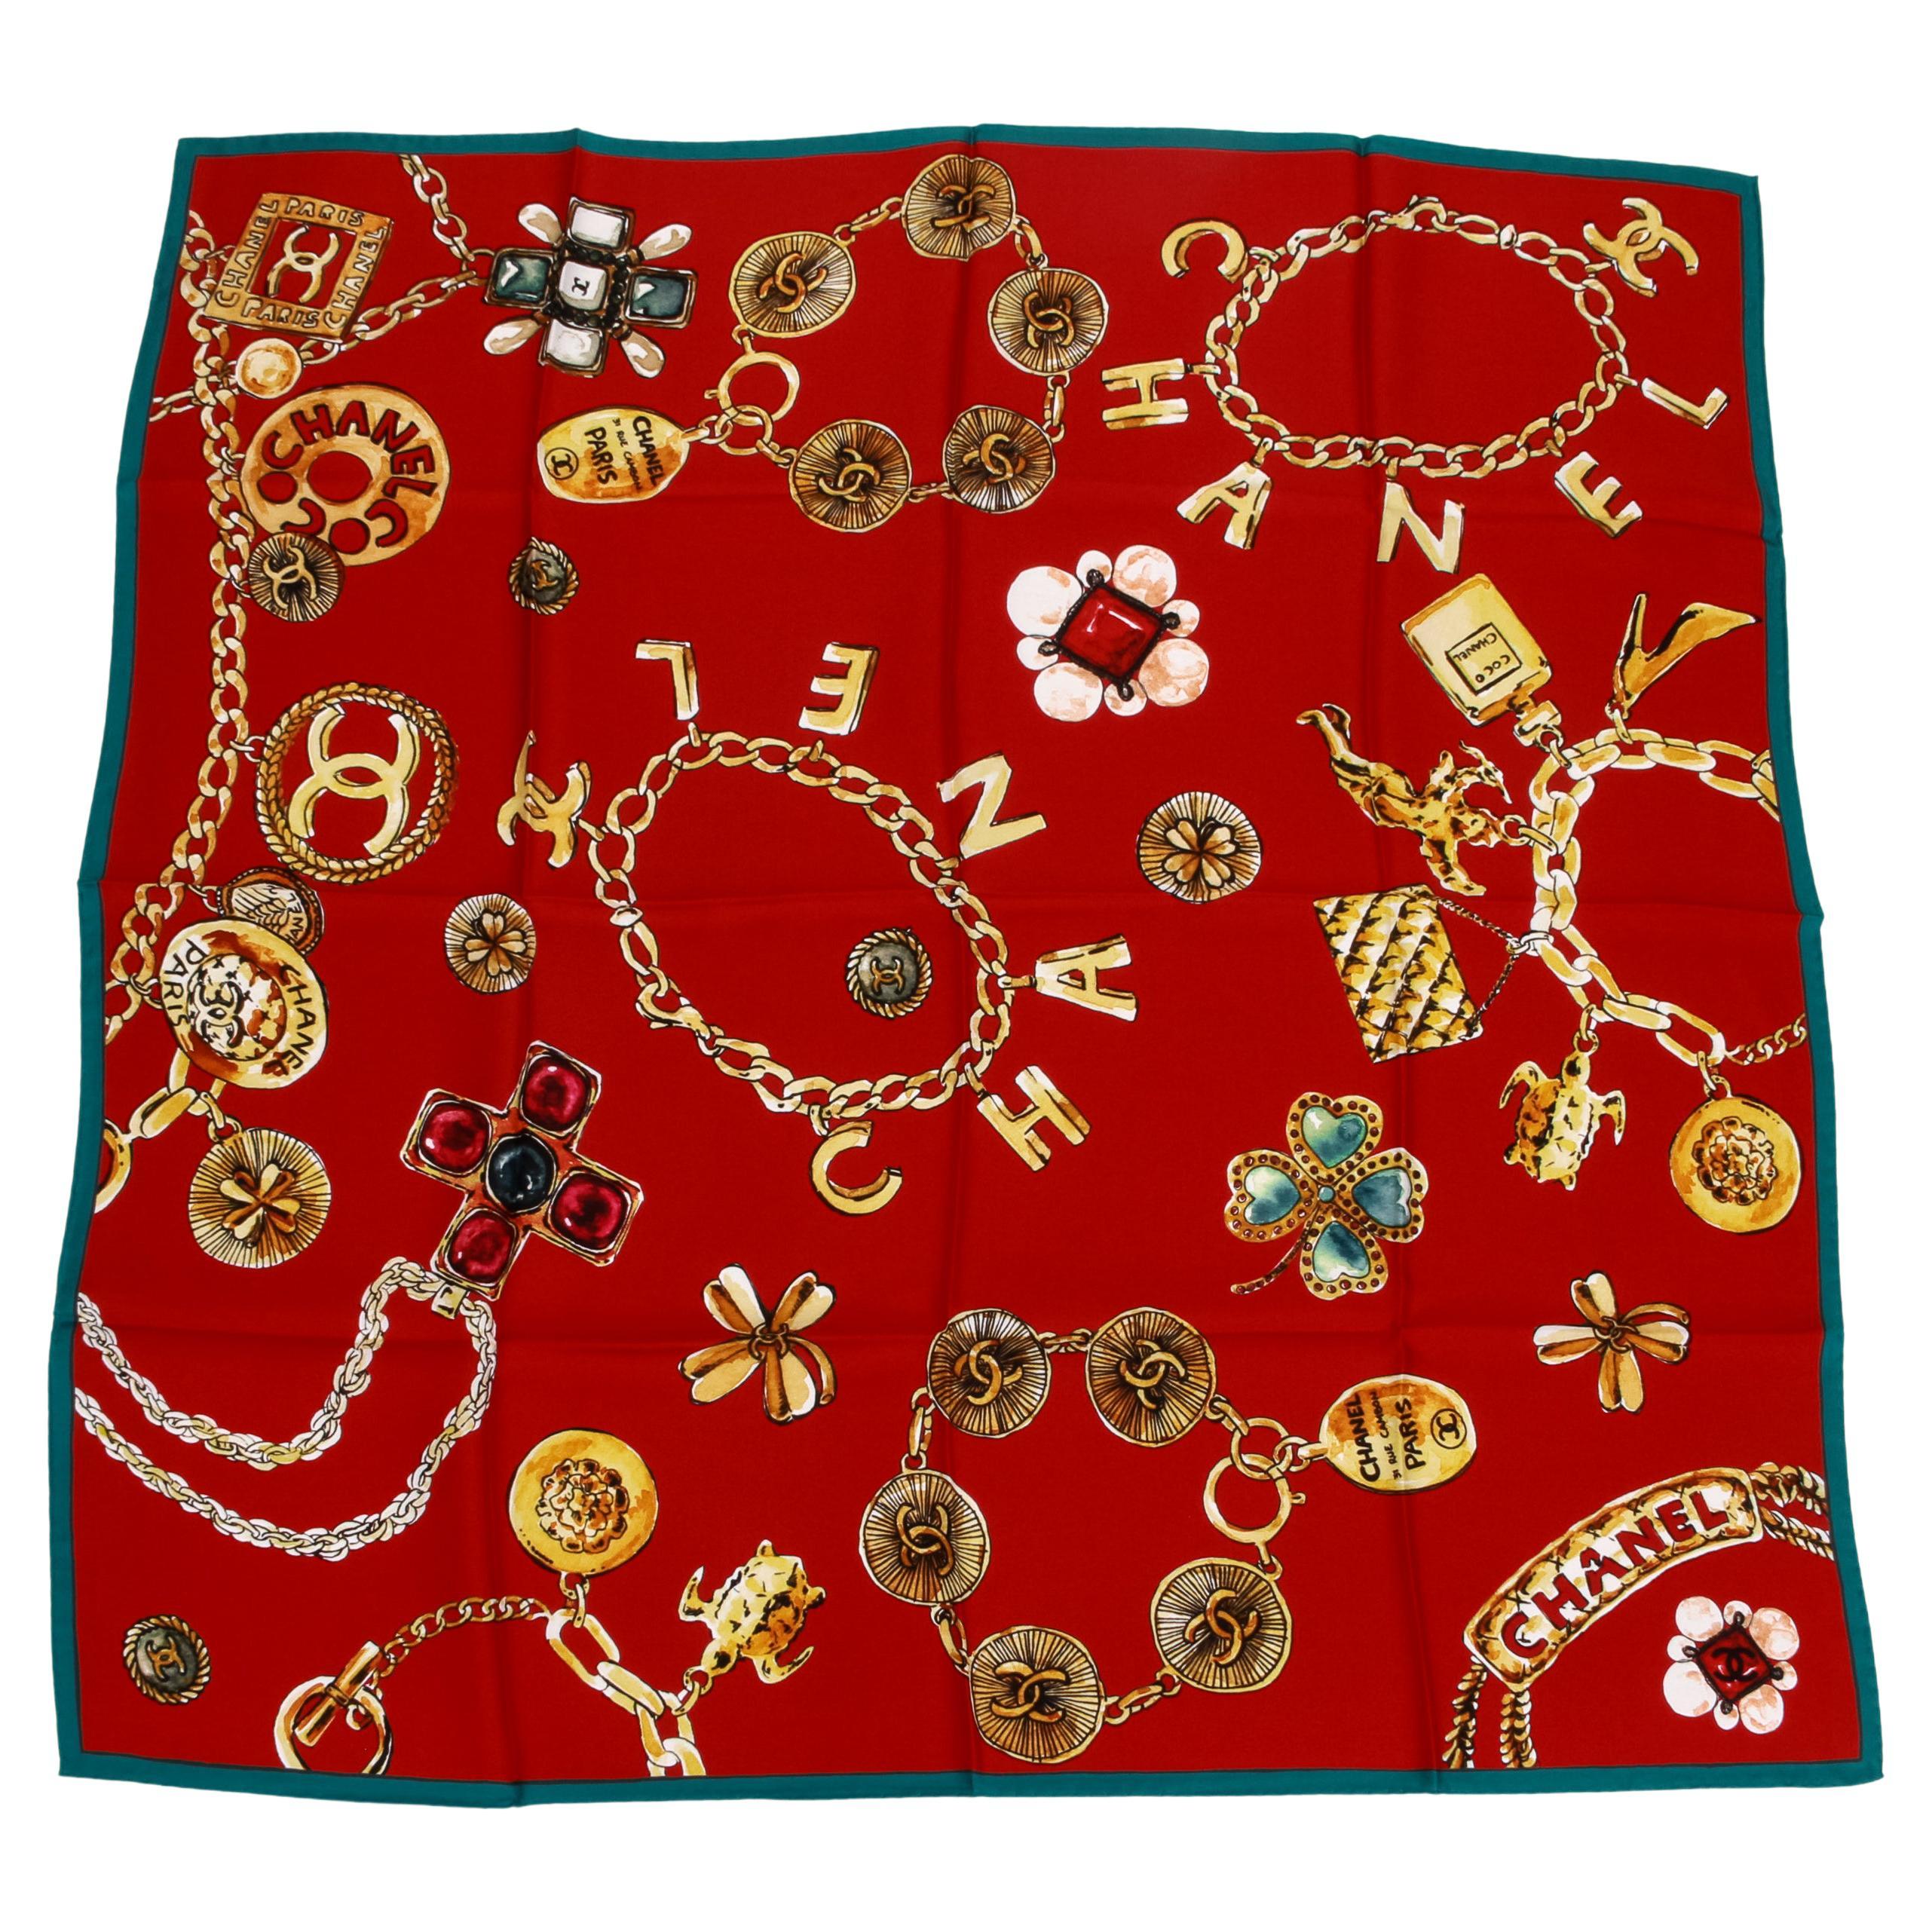 New Chanel Red Iconic Jewerly Silk Scarf